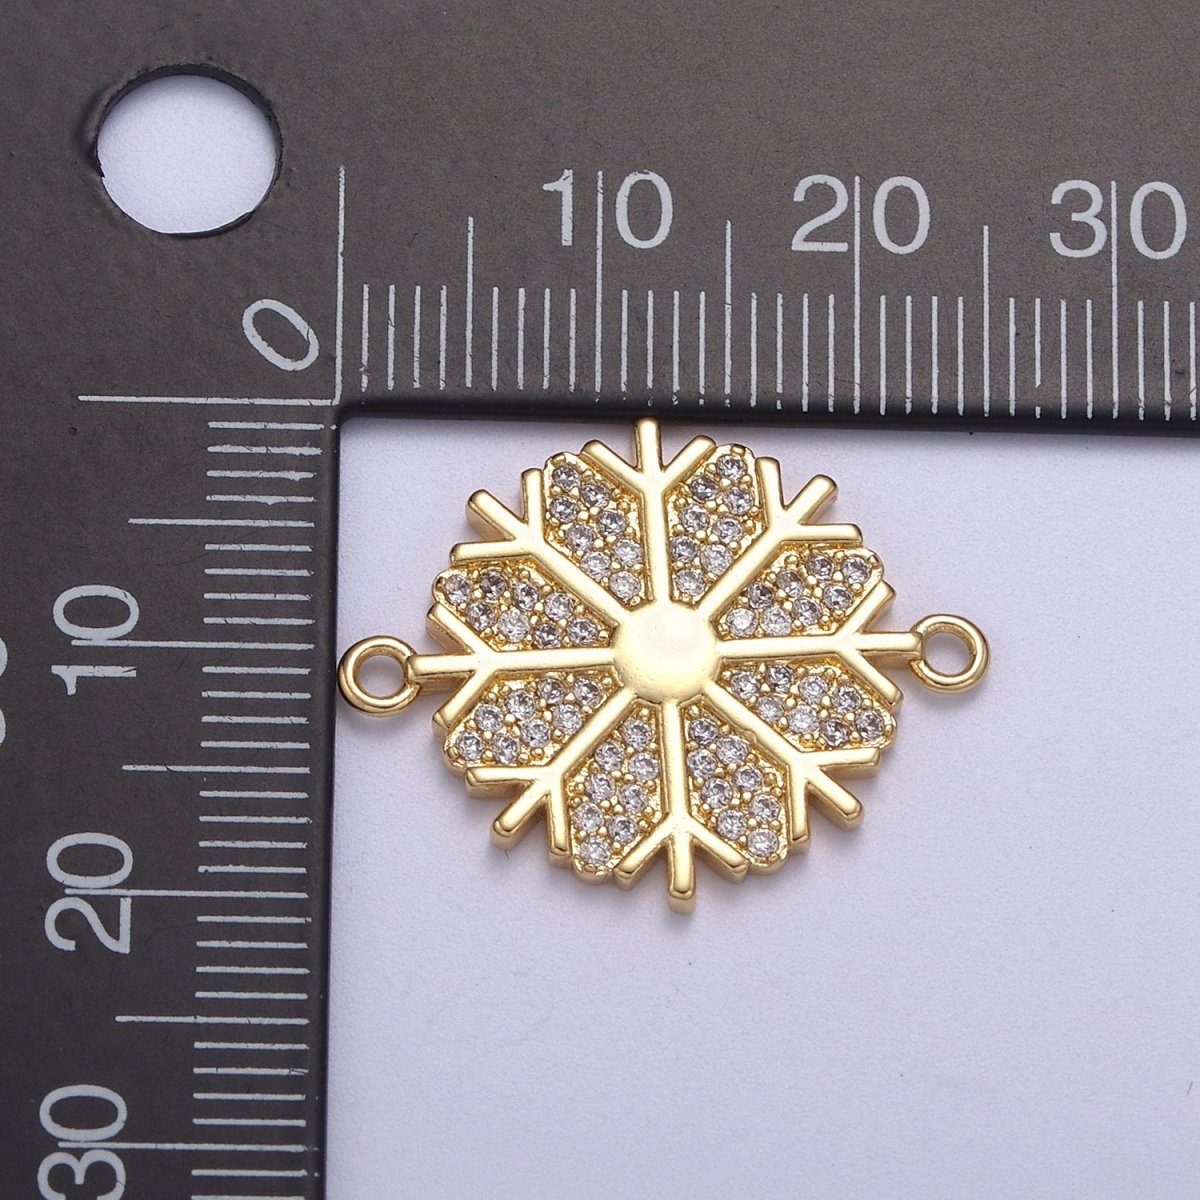 Dainty Gold Filled Snow Charm Connector Cz Snow Flake Link Connector for Bracelet Earring Necklace F-126 - DLUXCA